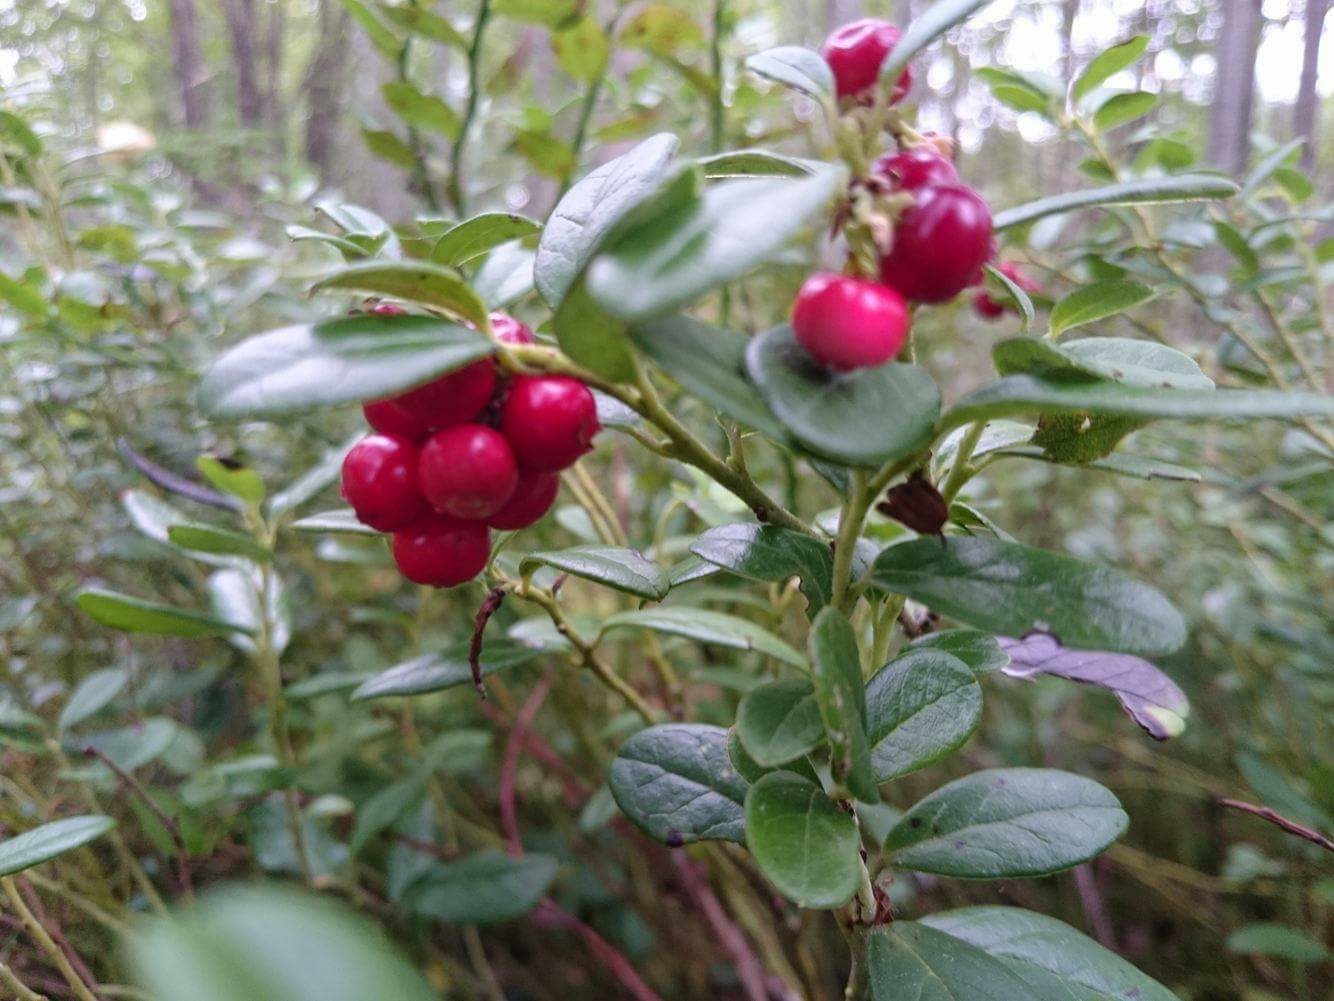 Ever seen lingon berries growing wild? Don't eat them, they taste awful directly from the bushes. (Or do, I'm not your parent. At least you won't die)